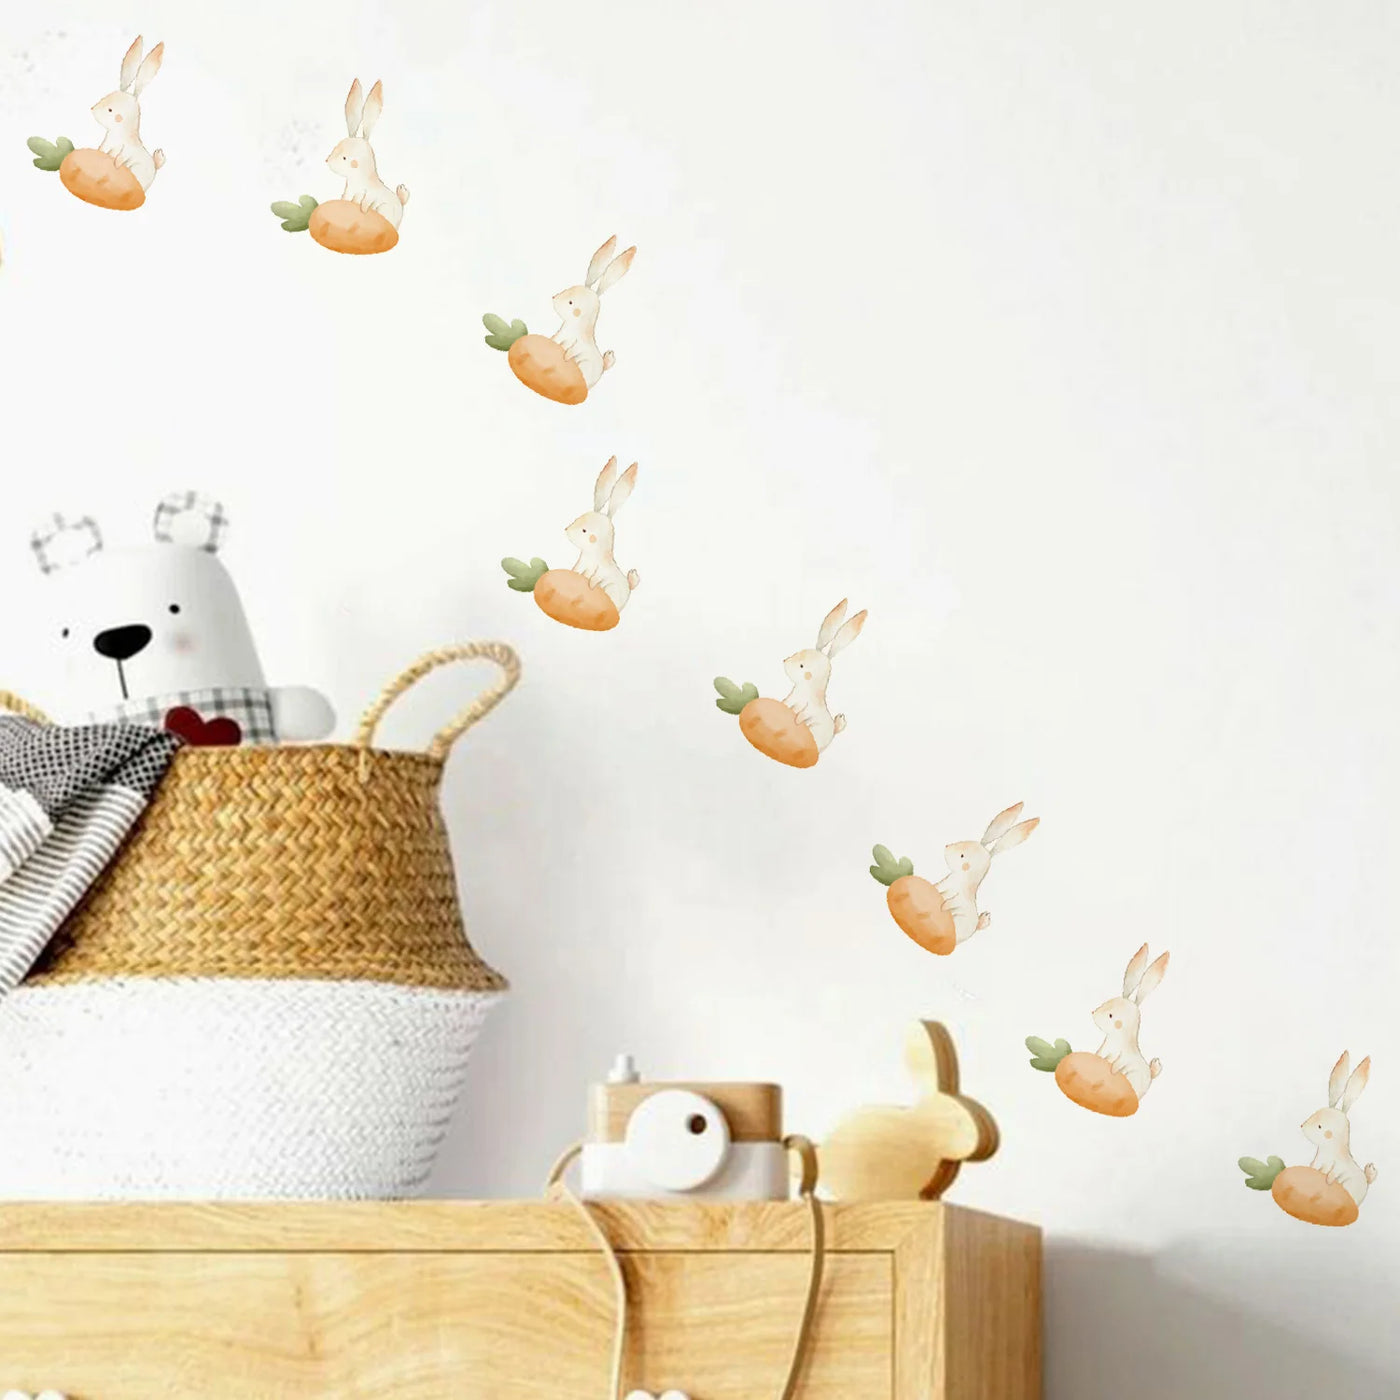 Watercolor Bunny Wall Decal Stickers